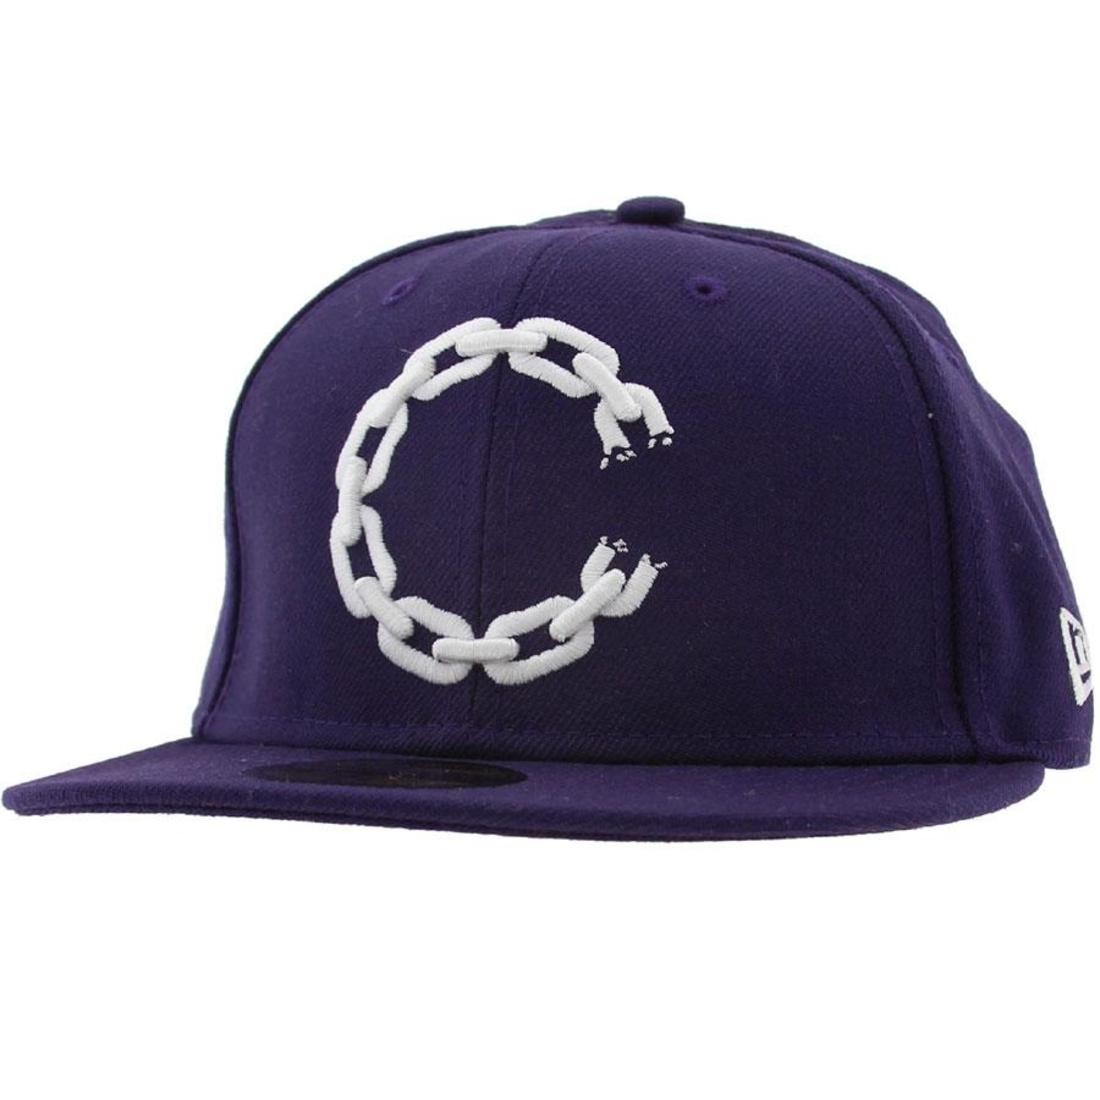 Crooks and Castles C Link Logo New Era Fitted Cap (purple)